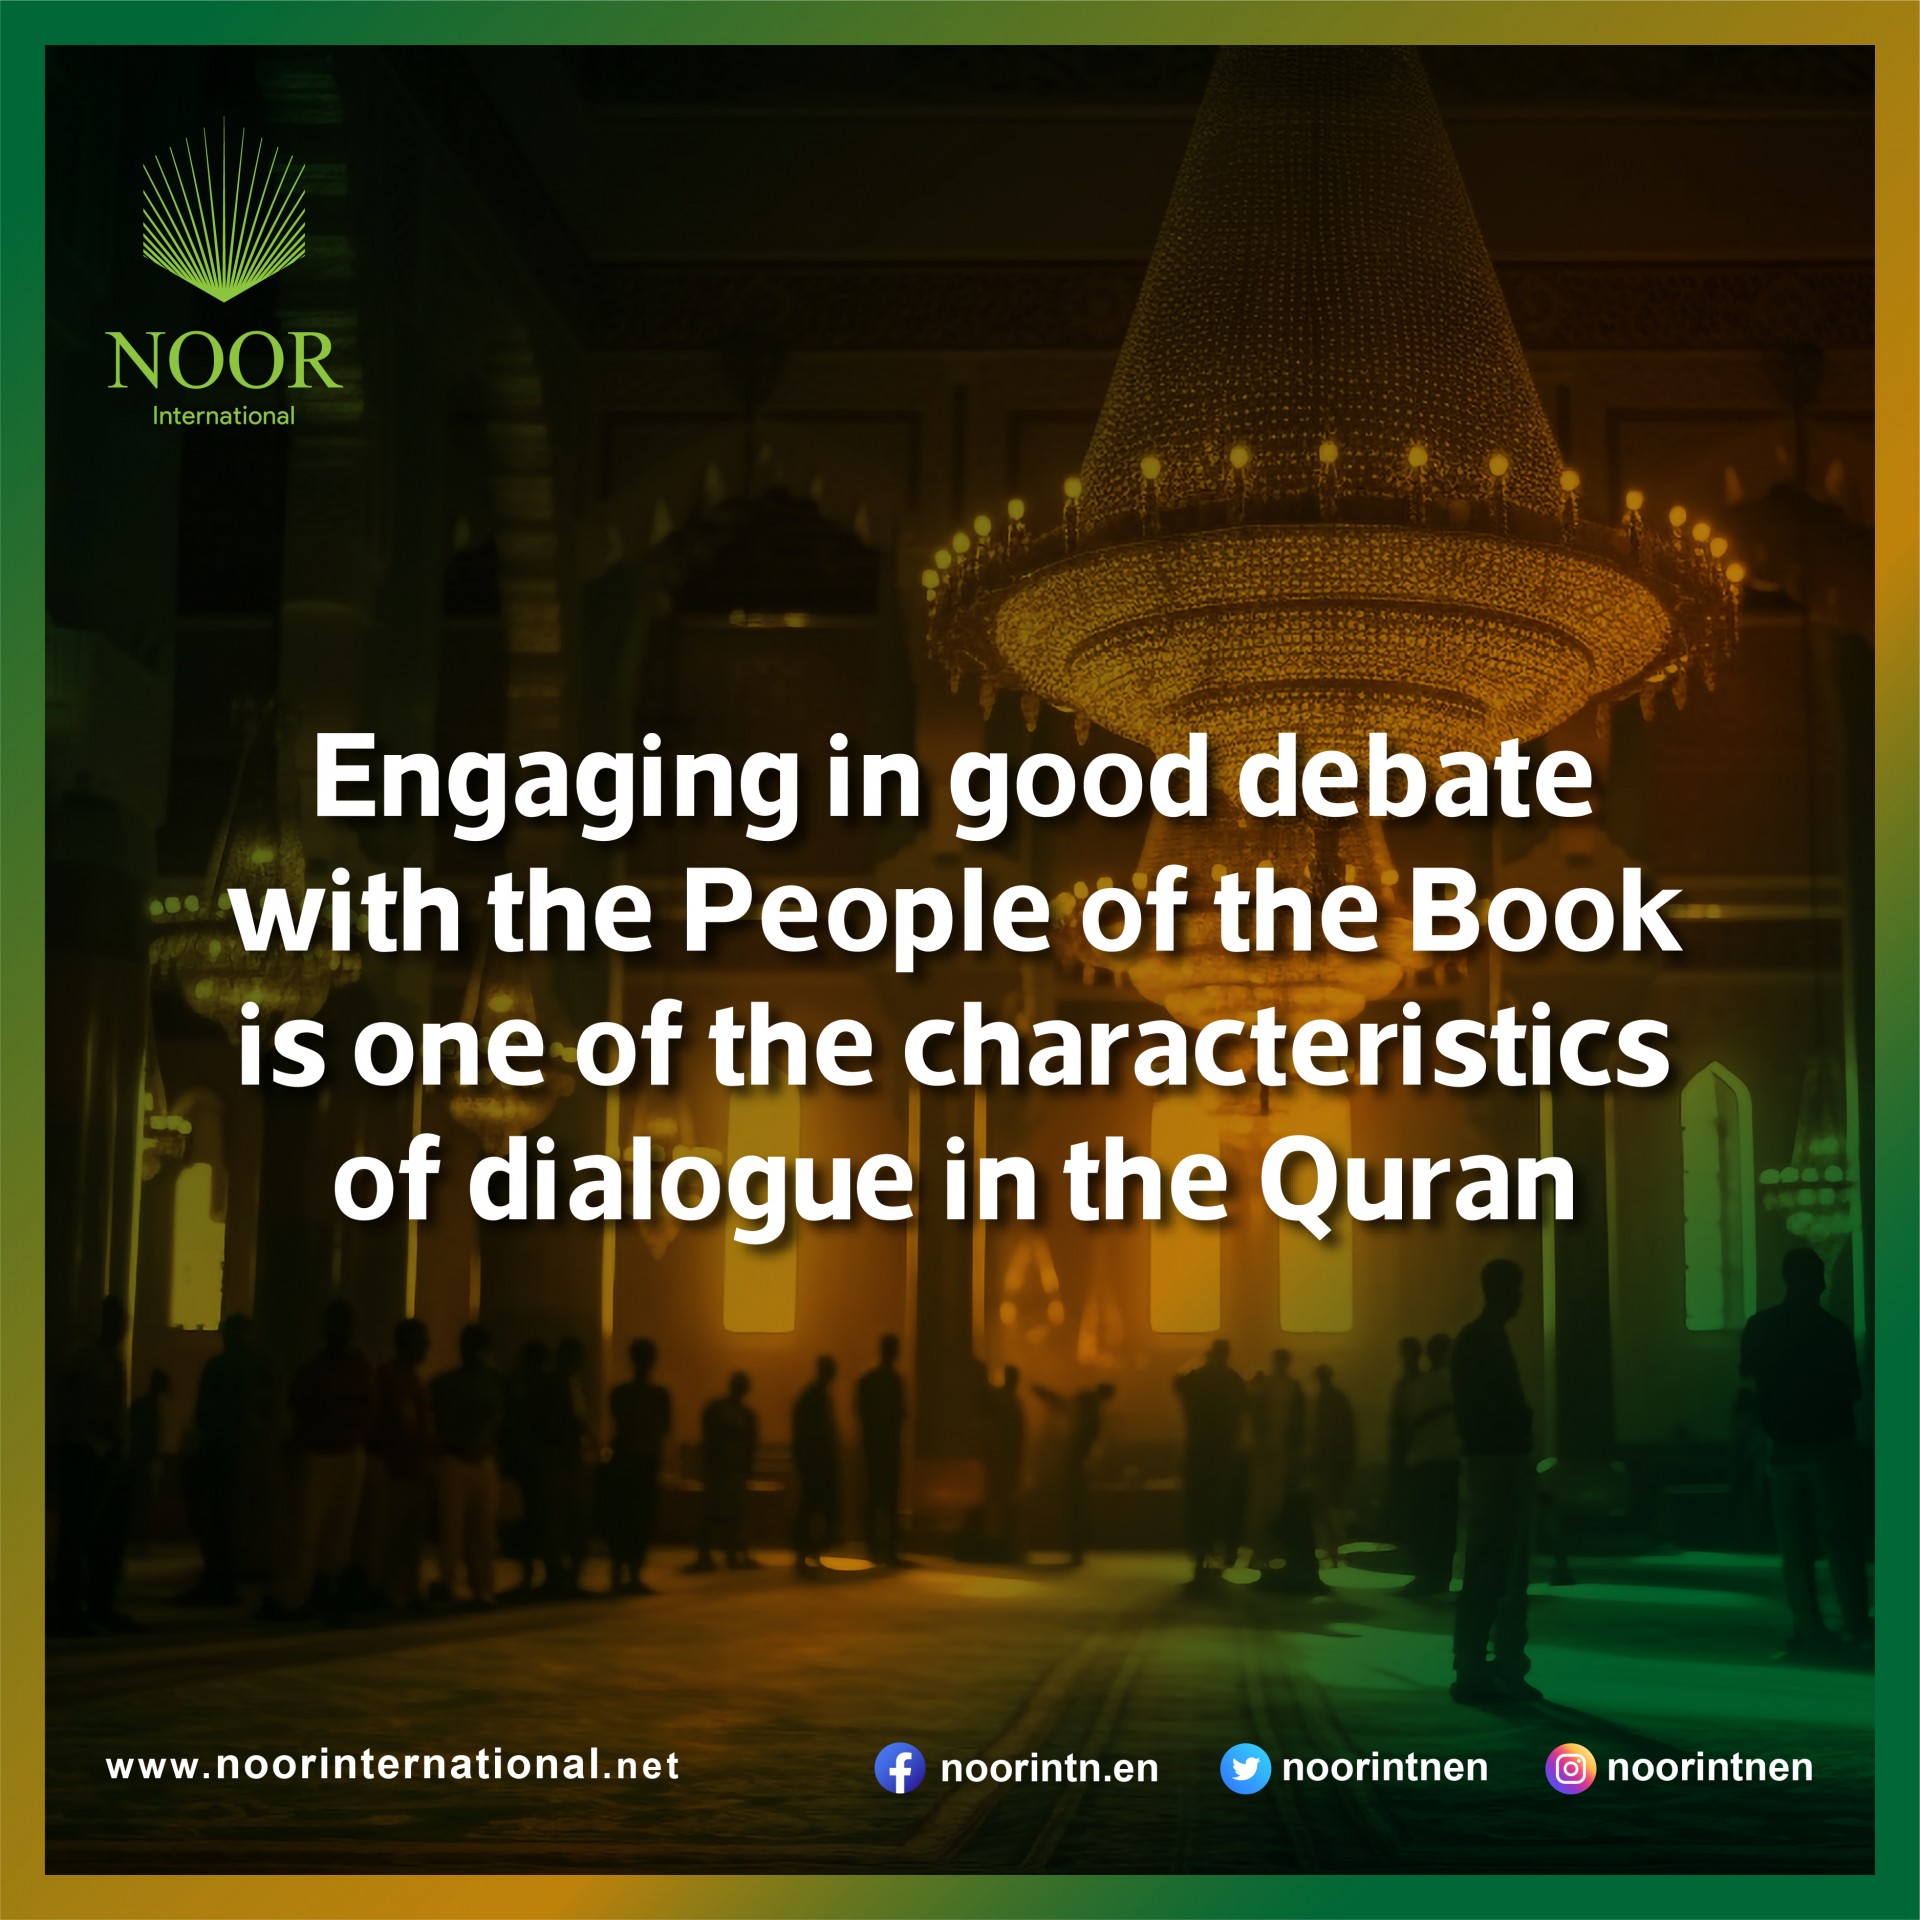 Engaging in good debate with the People of the Book is one of the characteristics of dialogue in the Quran